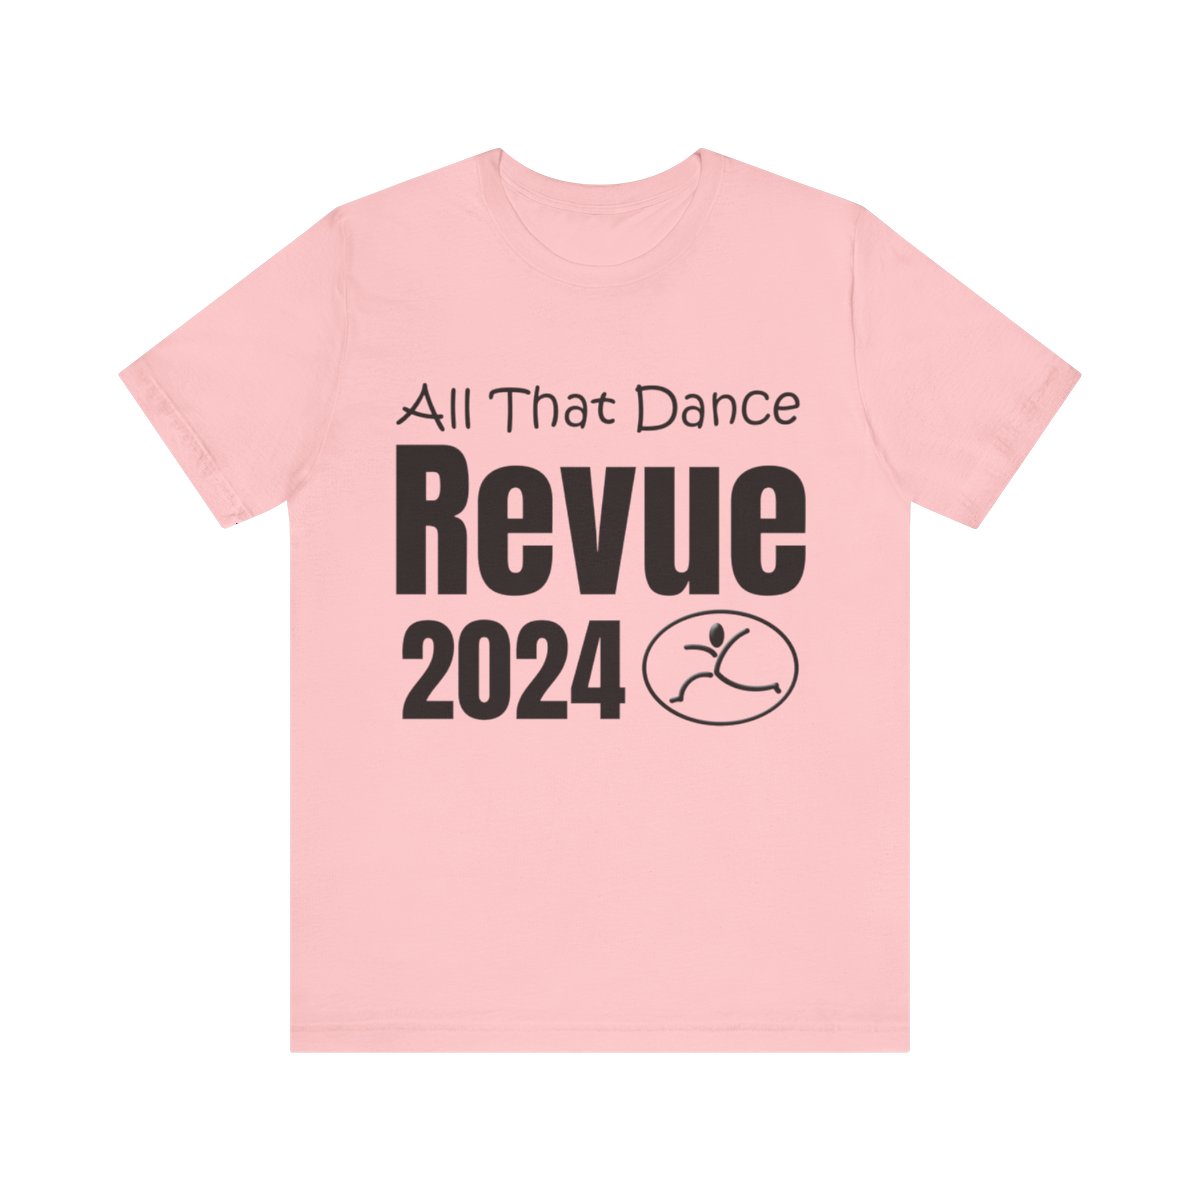 Adult Sizes - All That Dance Revue 2024 Tshirt product main image